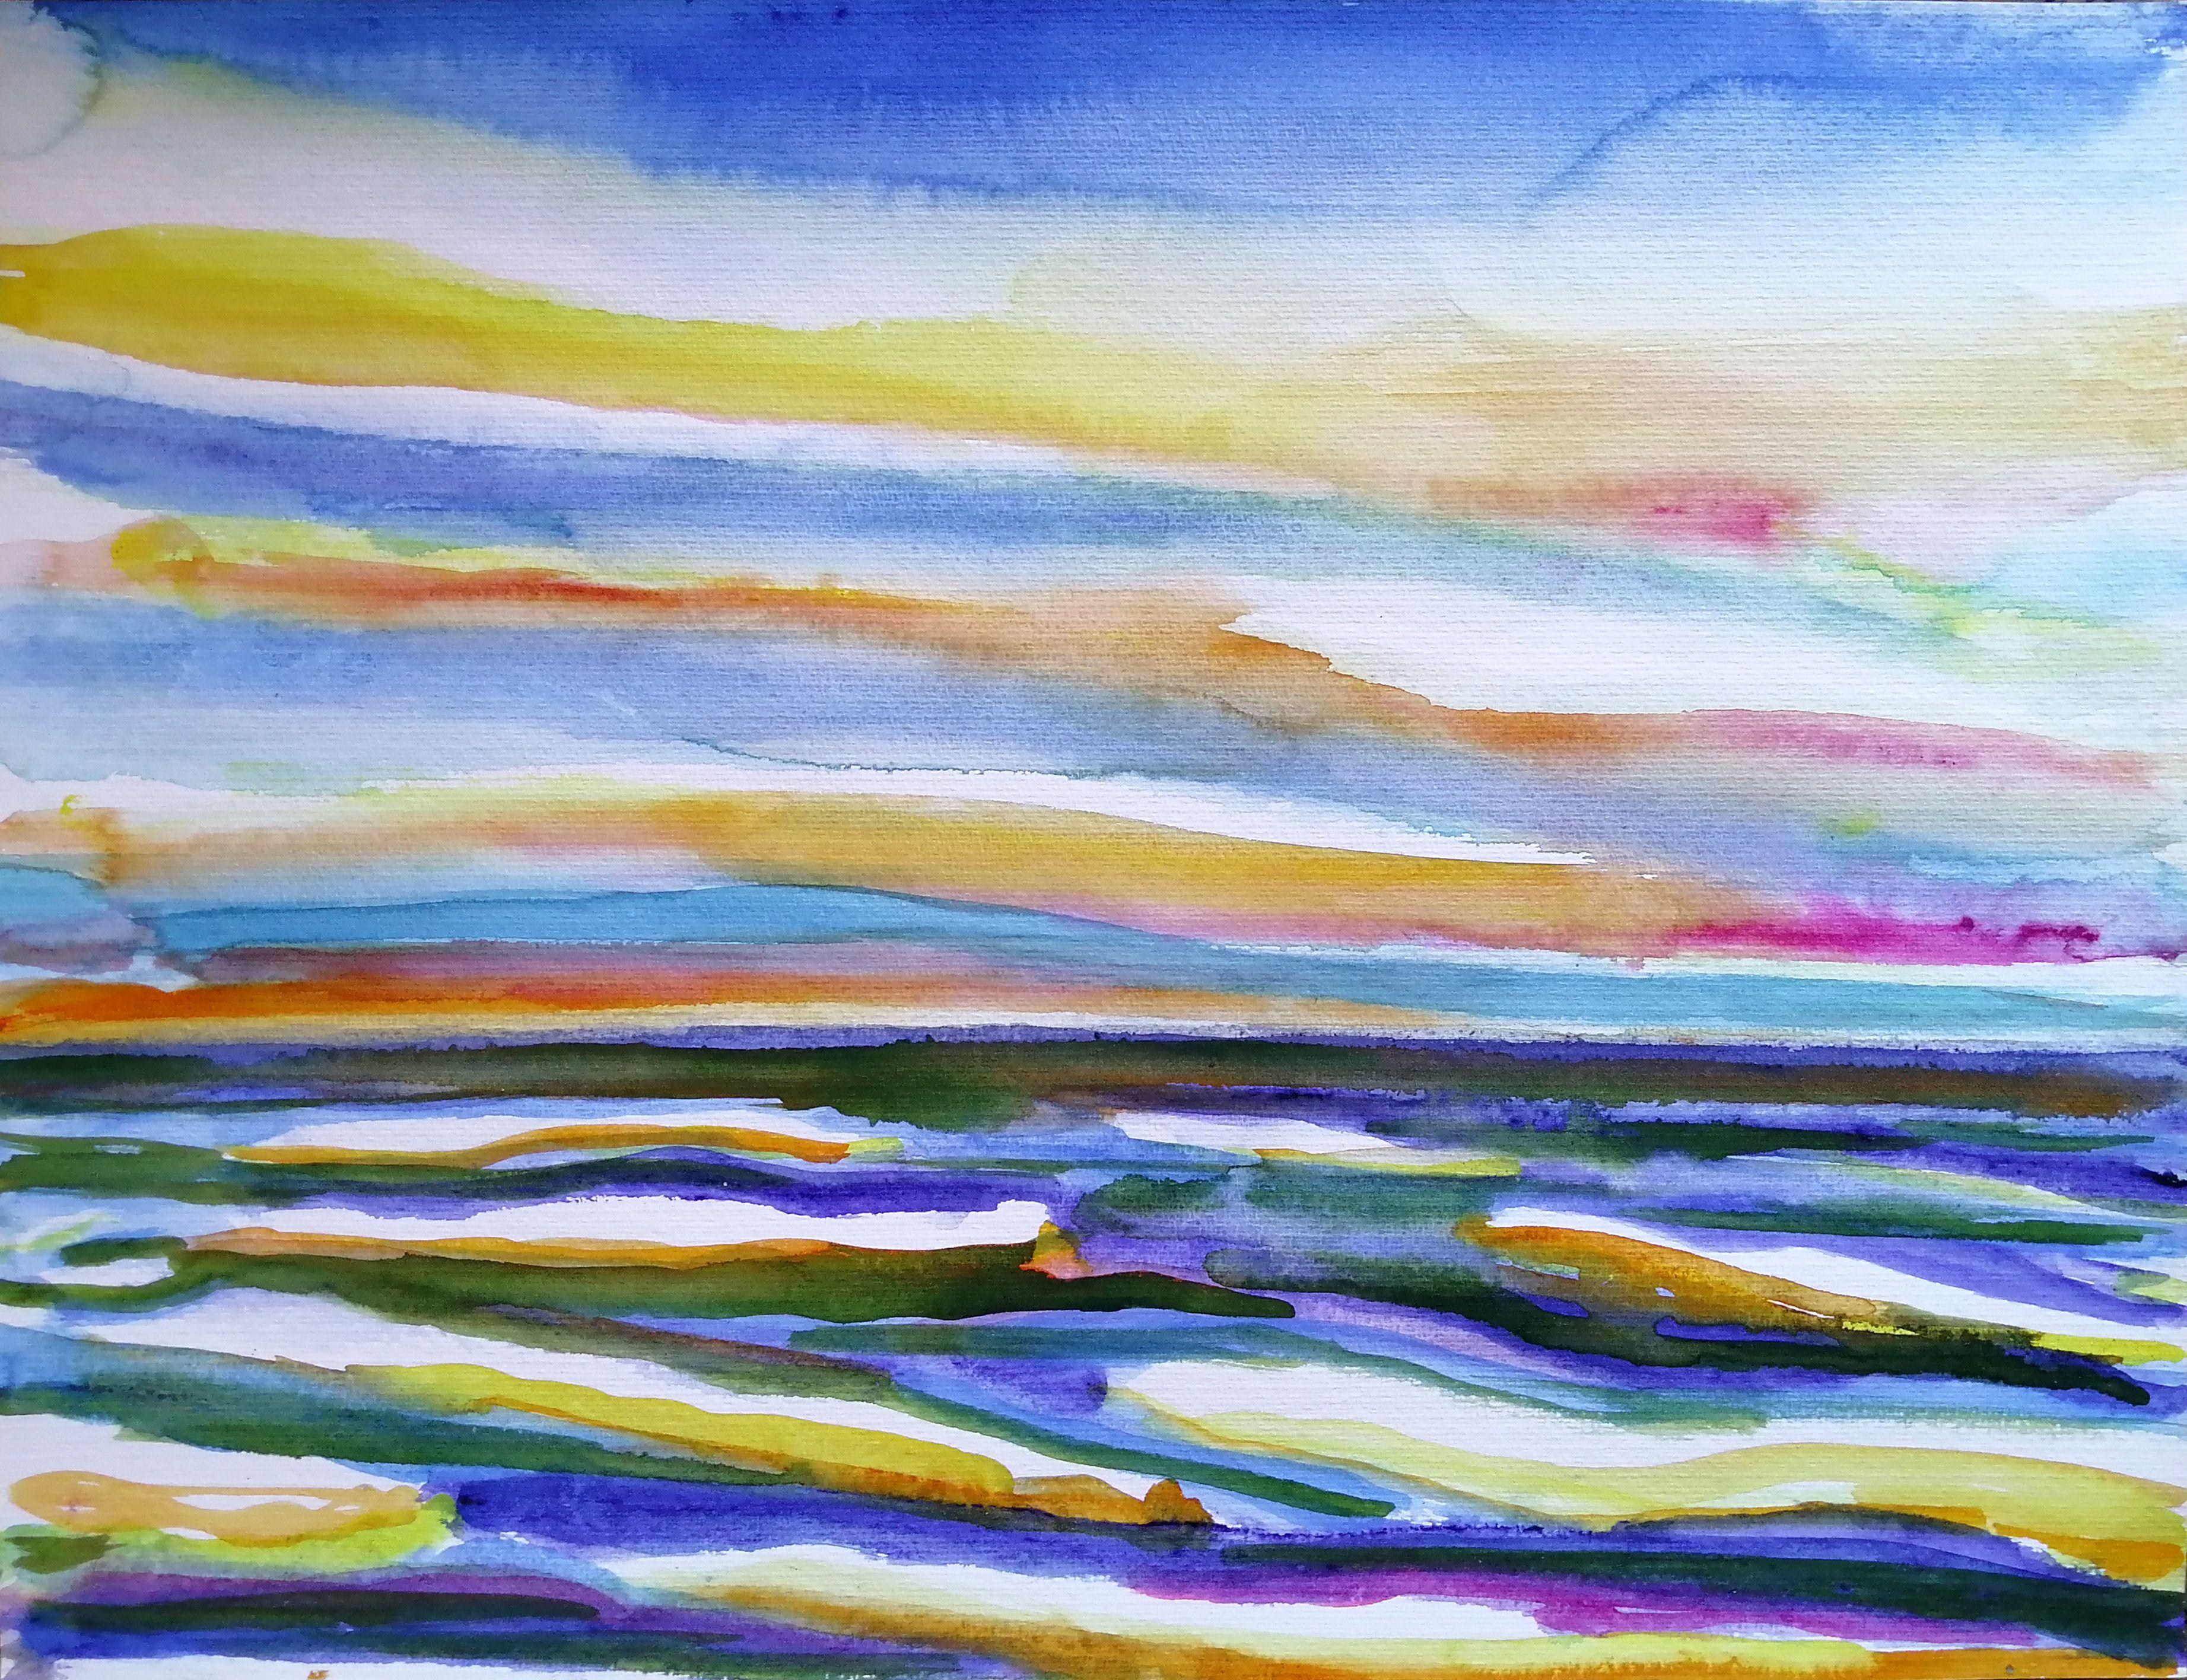 The Spirit of the Baltic Sea 2, Painting, Watercolor on Watercolor Paper - Art by Marko Fenske